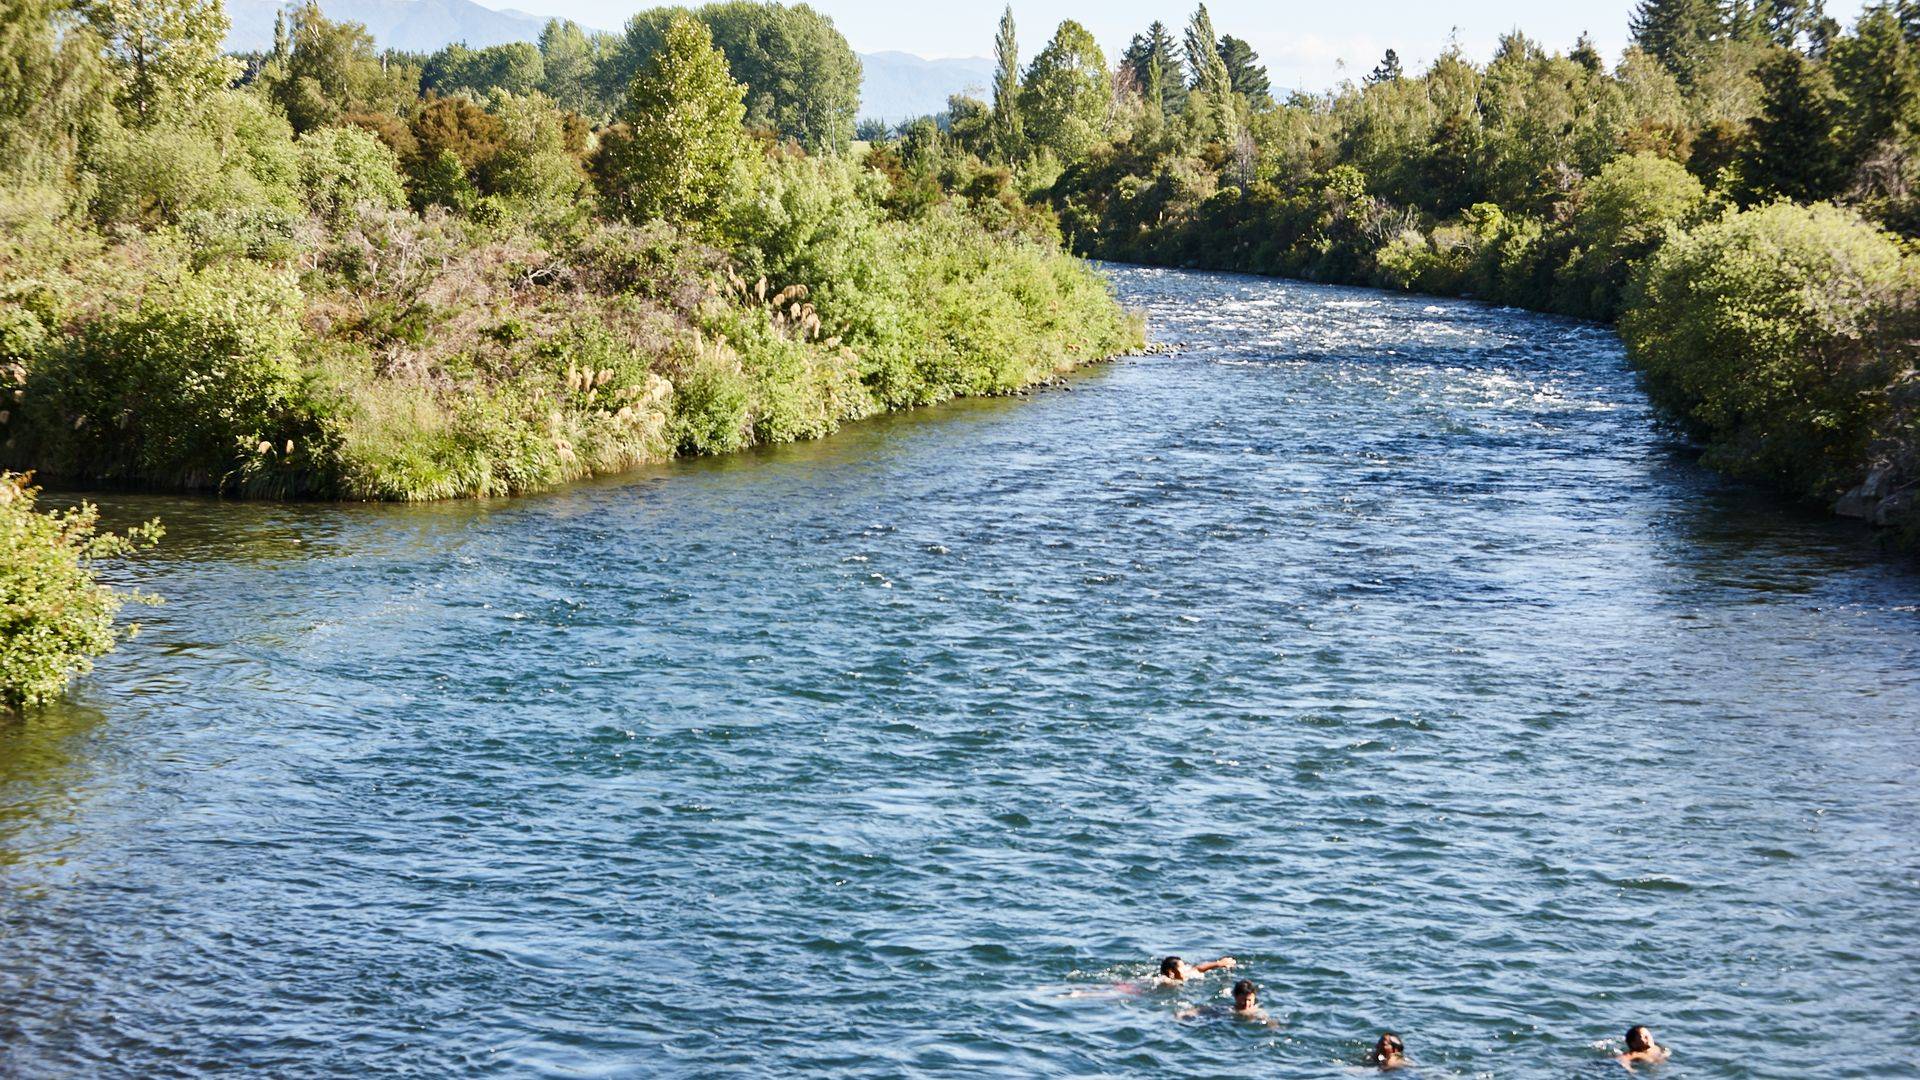 People swimming in stream that leads to Lake Taupo.